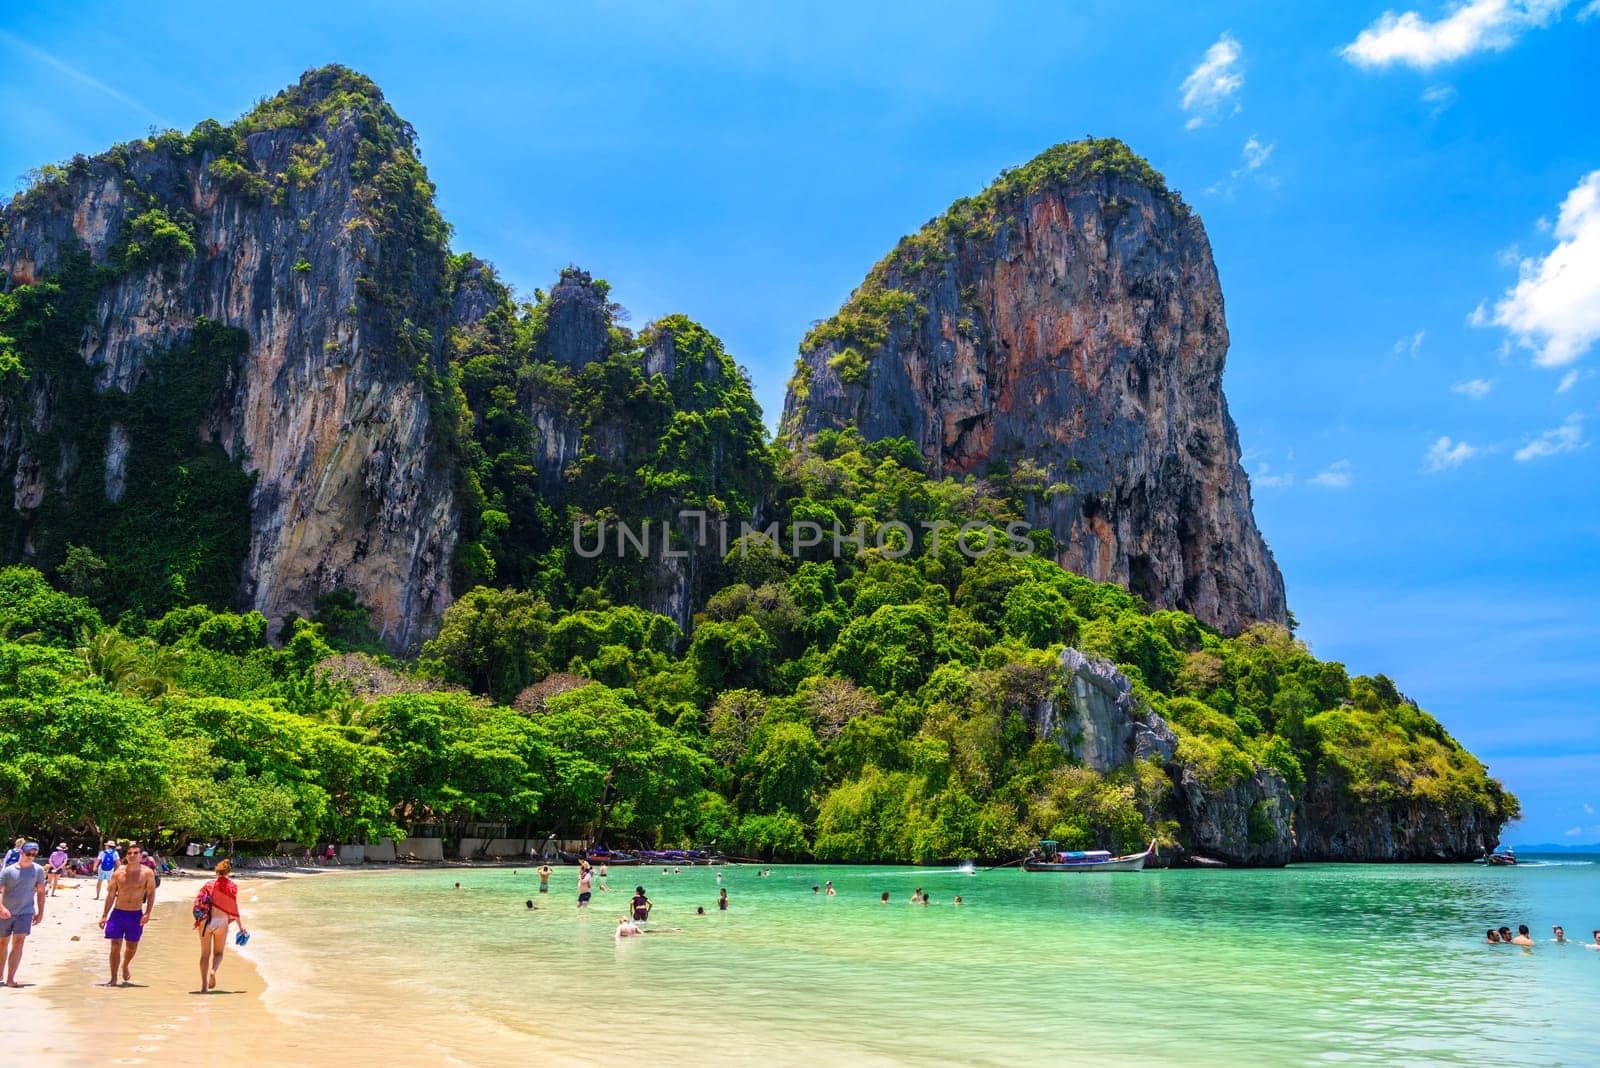 Rocks, water, tropical white sand beach and people swimming in emerald azure water of bay, Railay beach west, Ao Nang, Krabi, Thailand by Eagle2308